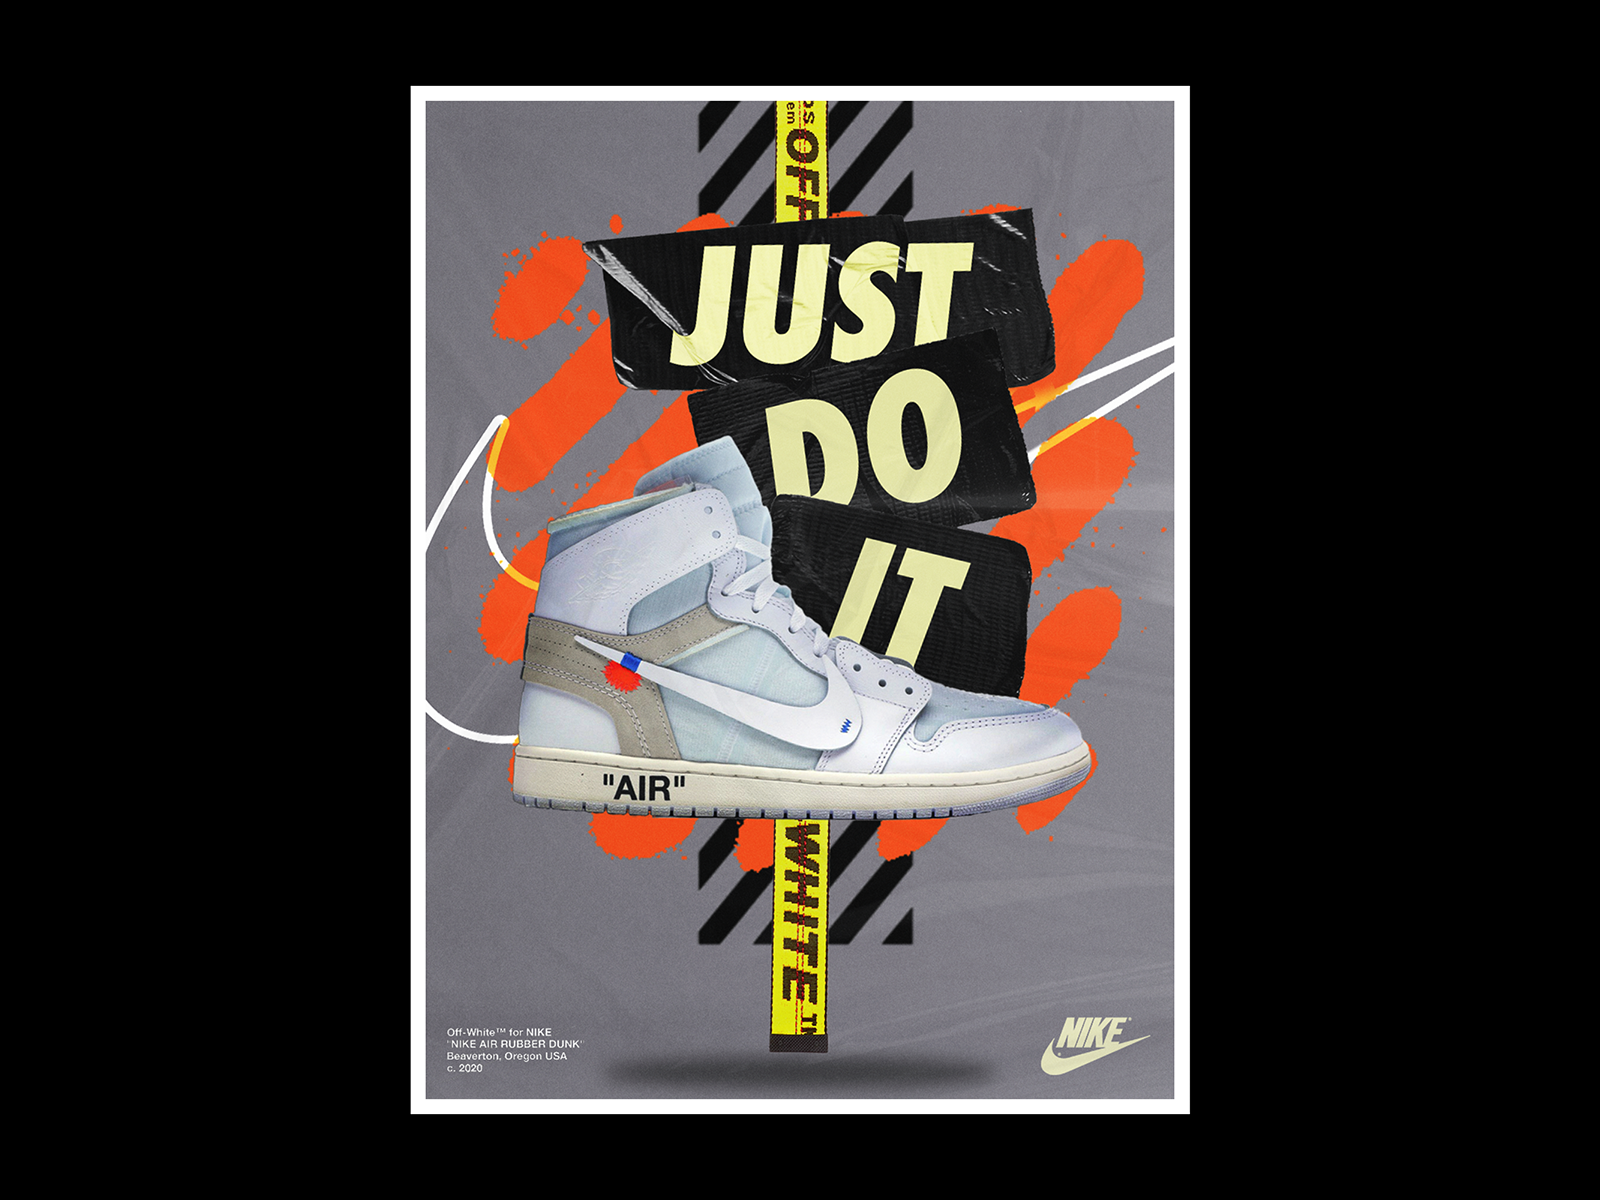 Nike × Off-White Poster by Mason 